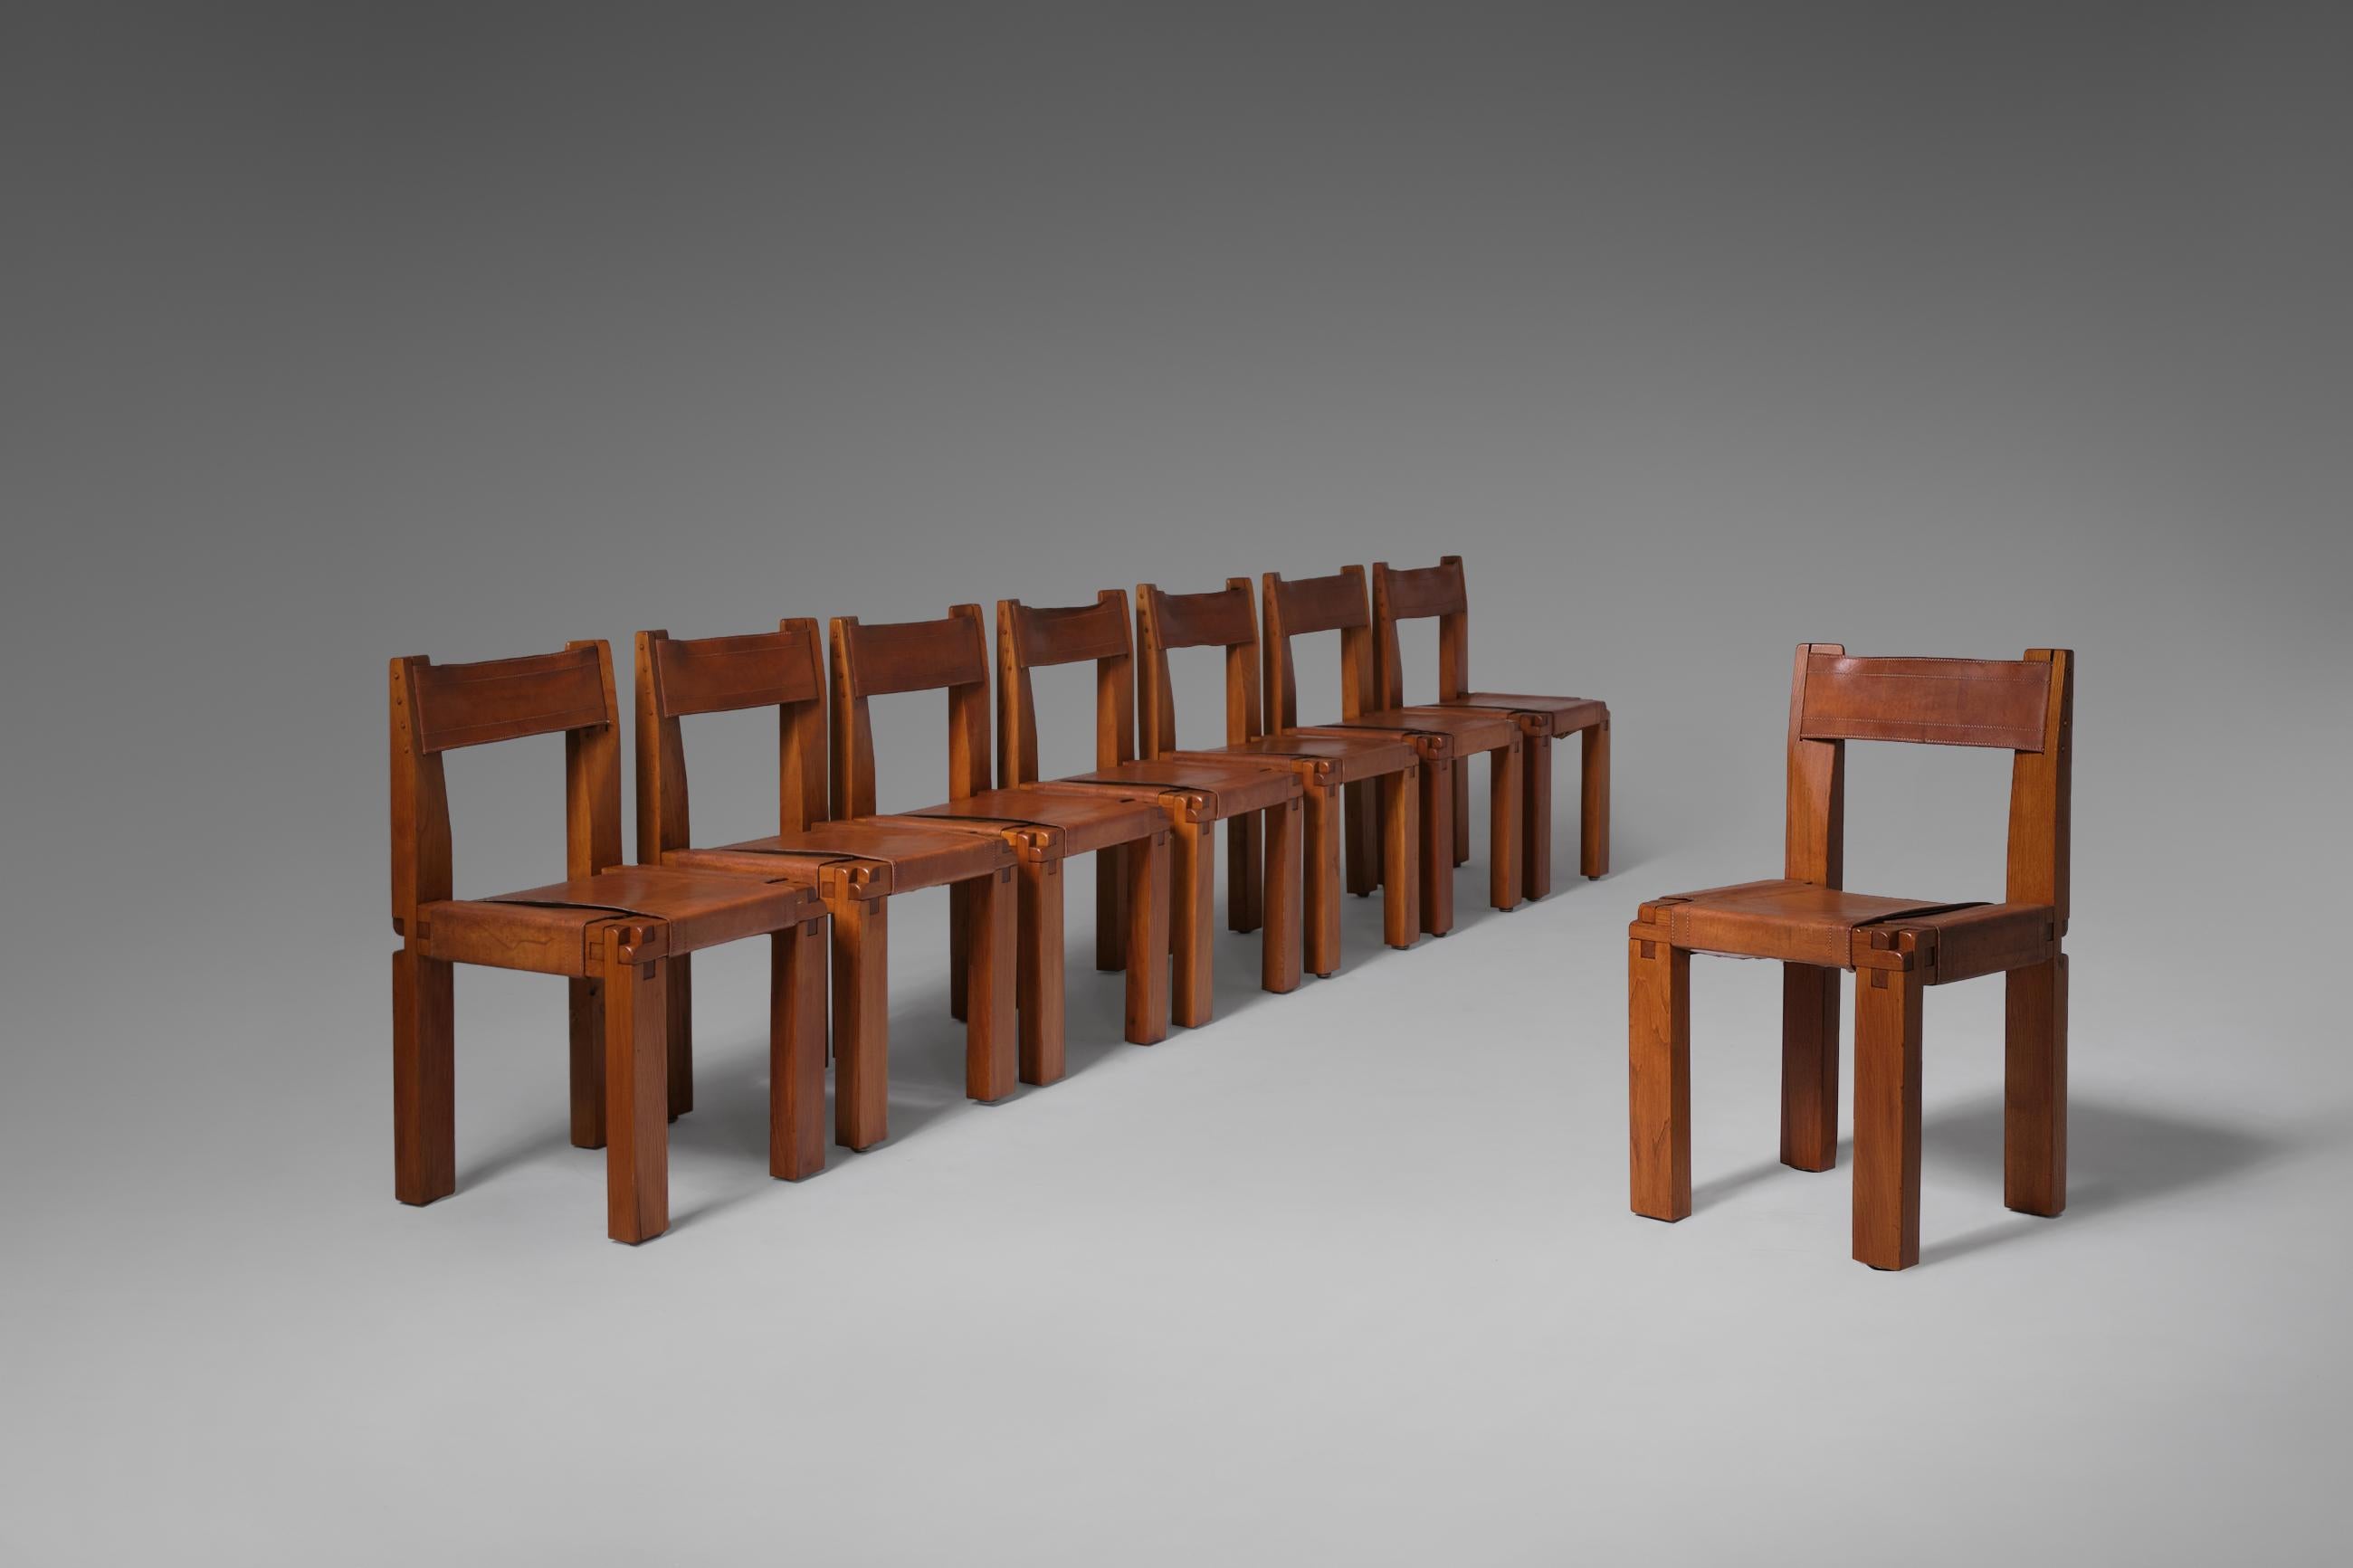 Stunning set of eight ‘S11’ dining chairs by Pierre Chapo, France 1966. Made of solid elmwood with beautifully patinated cognac saddle leather seating and back rest. The well crafted 